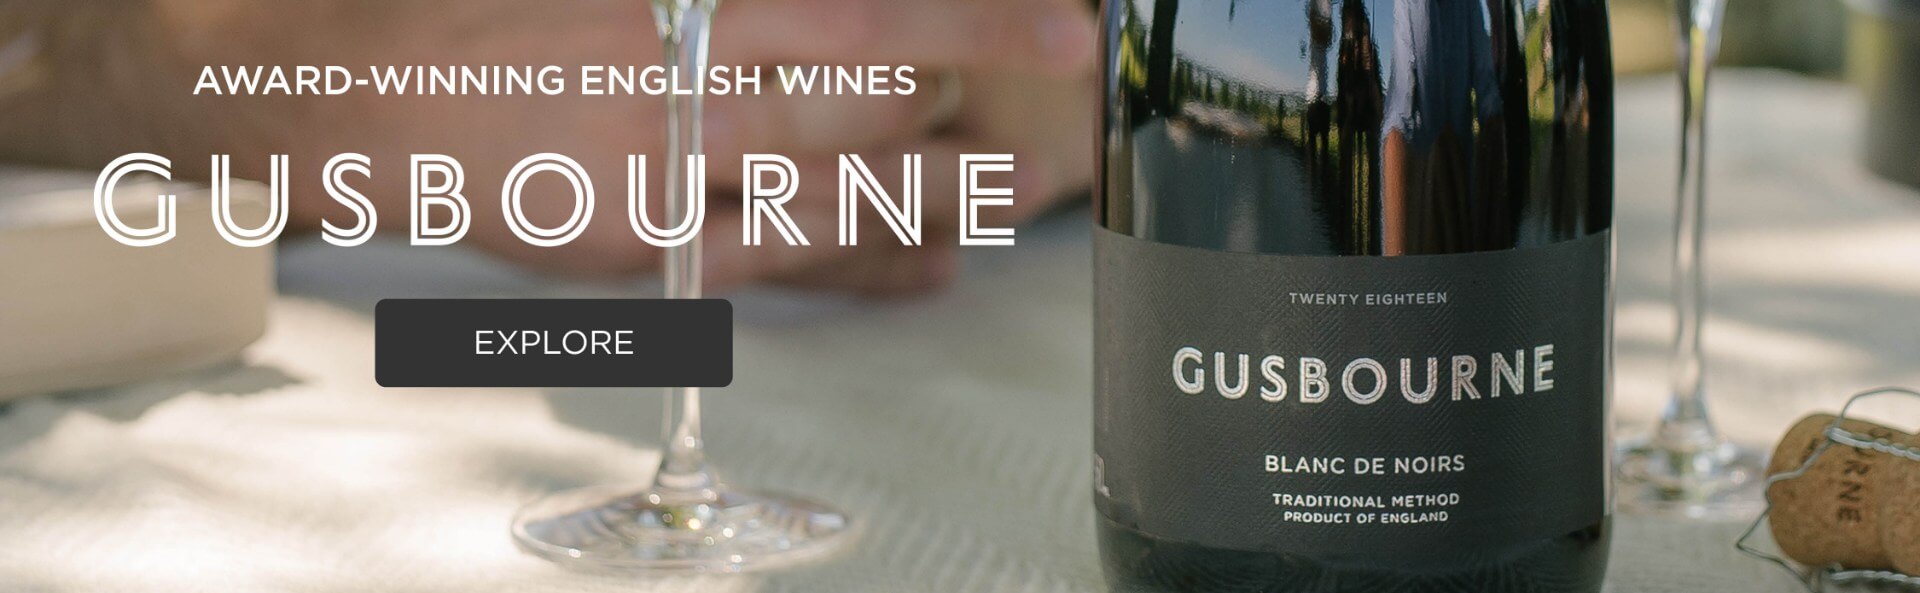 Gusbourne Wines, made in Sussex